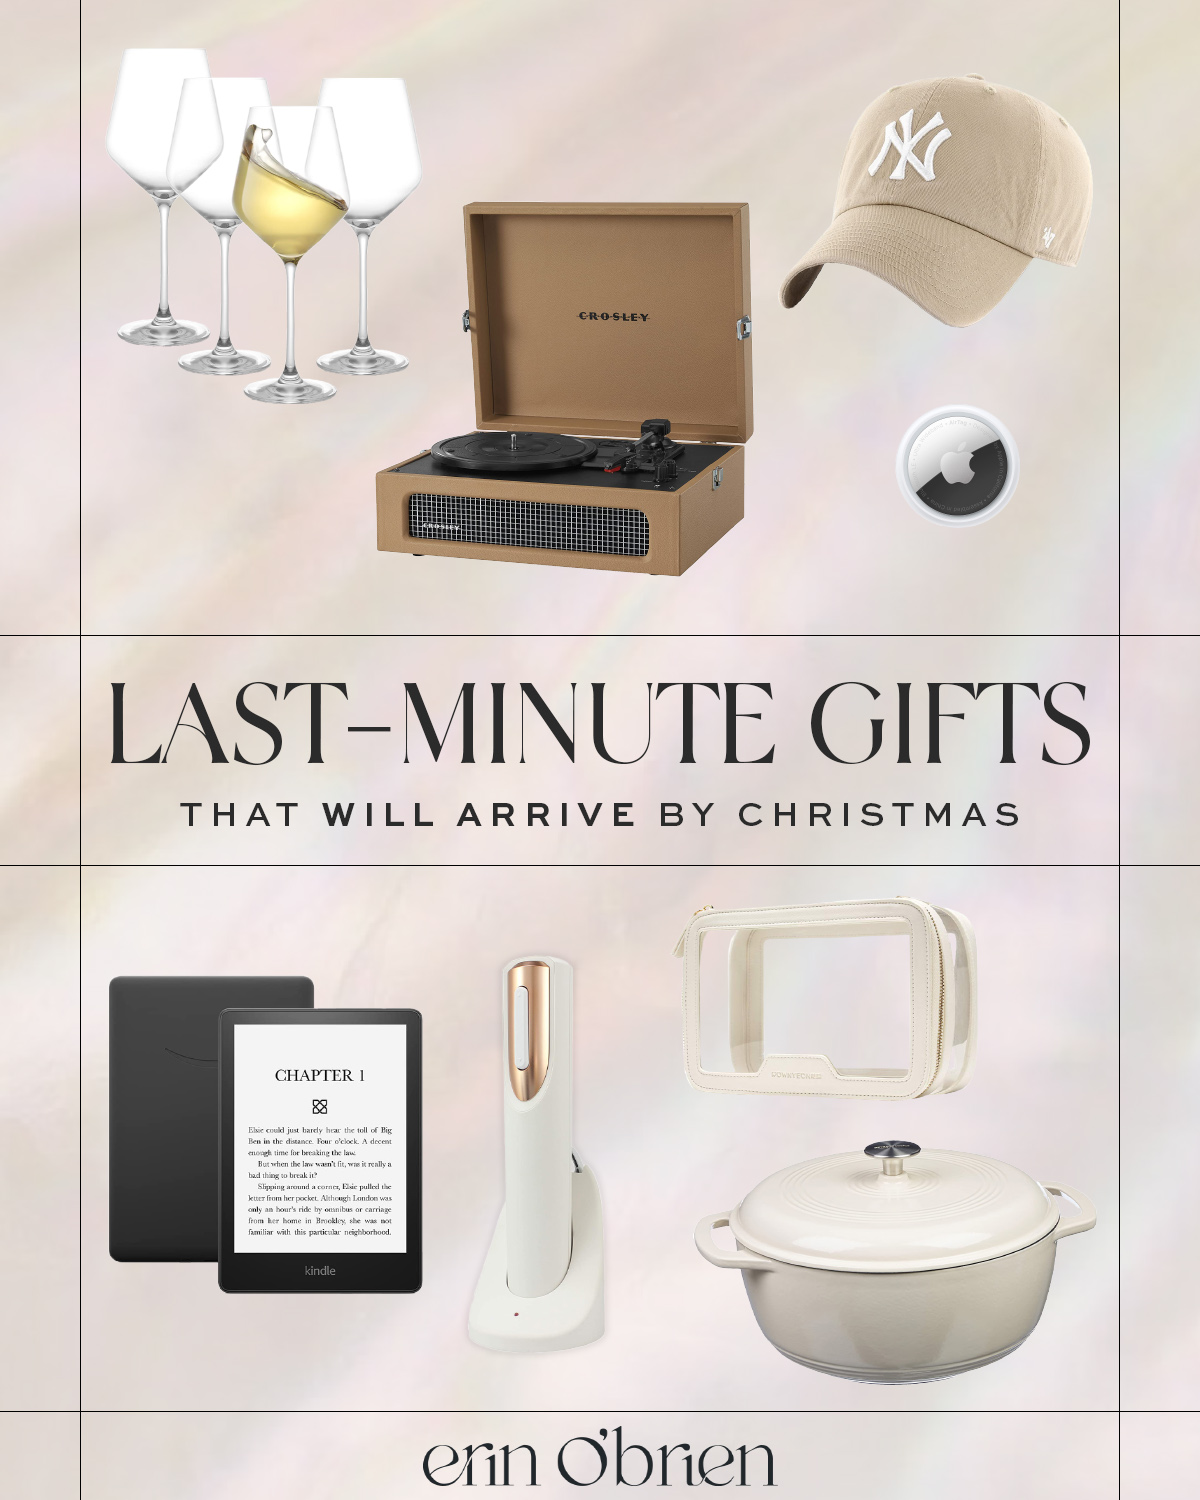 Last-minute gifts under $50: Gifts that will arrive by Christmas